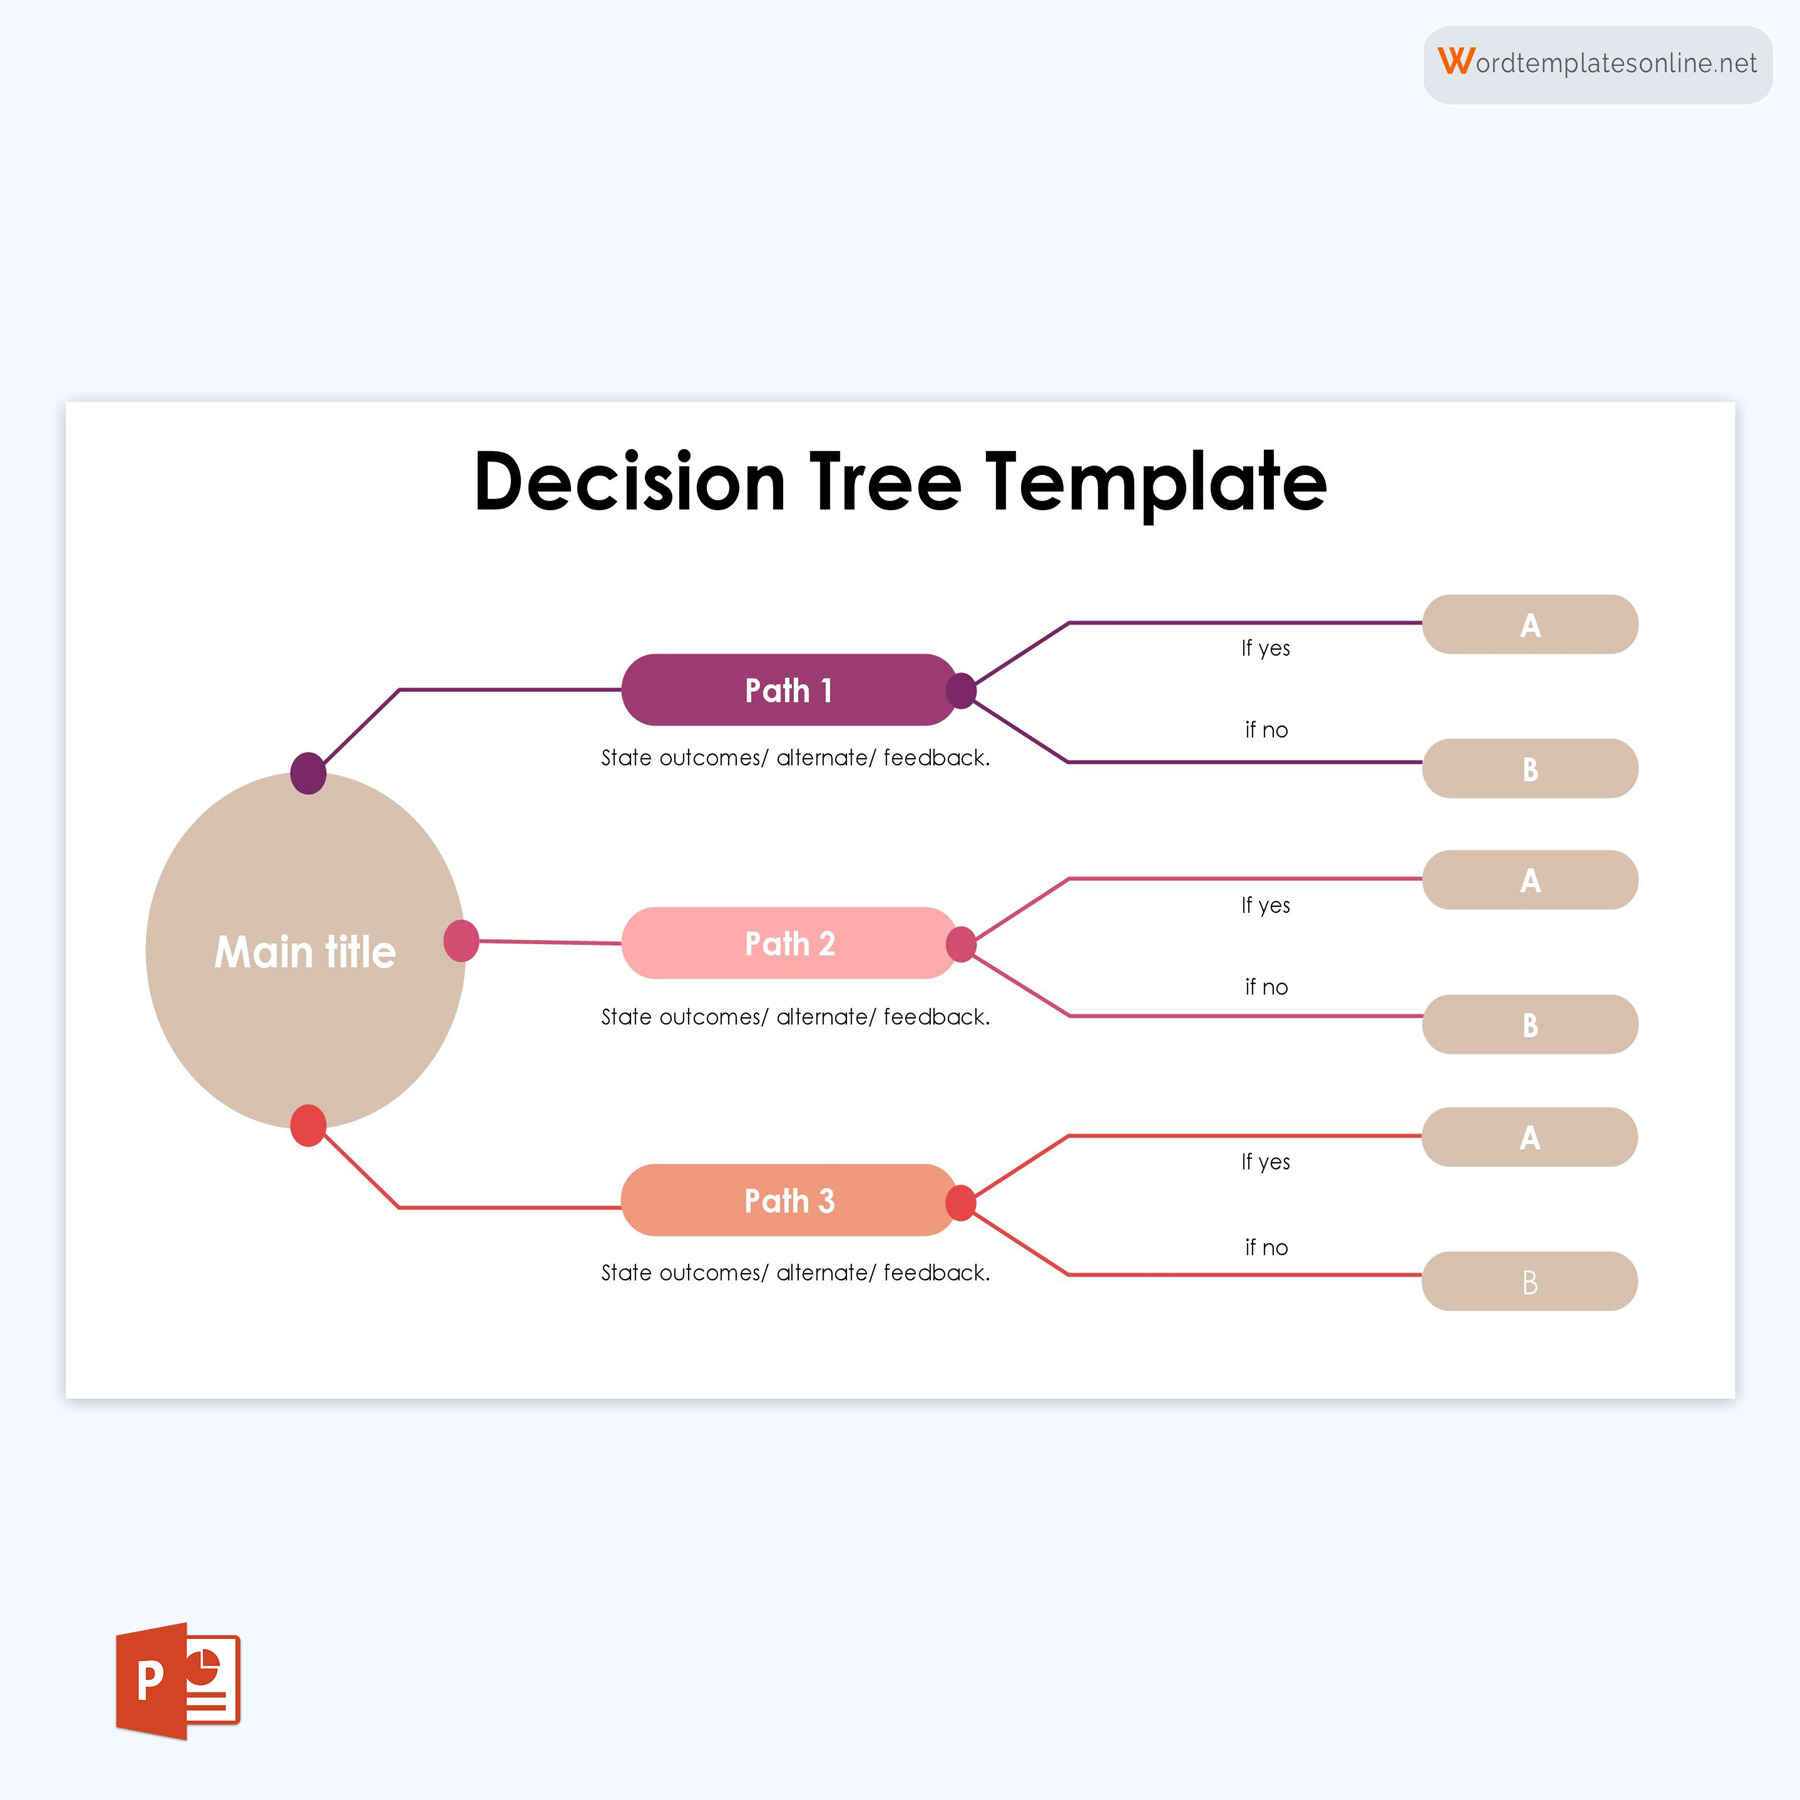 Decision Tree Template - Sample for Inspiration